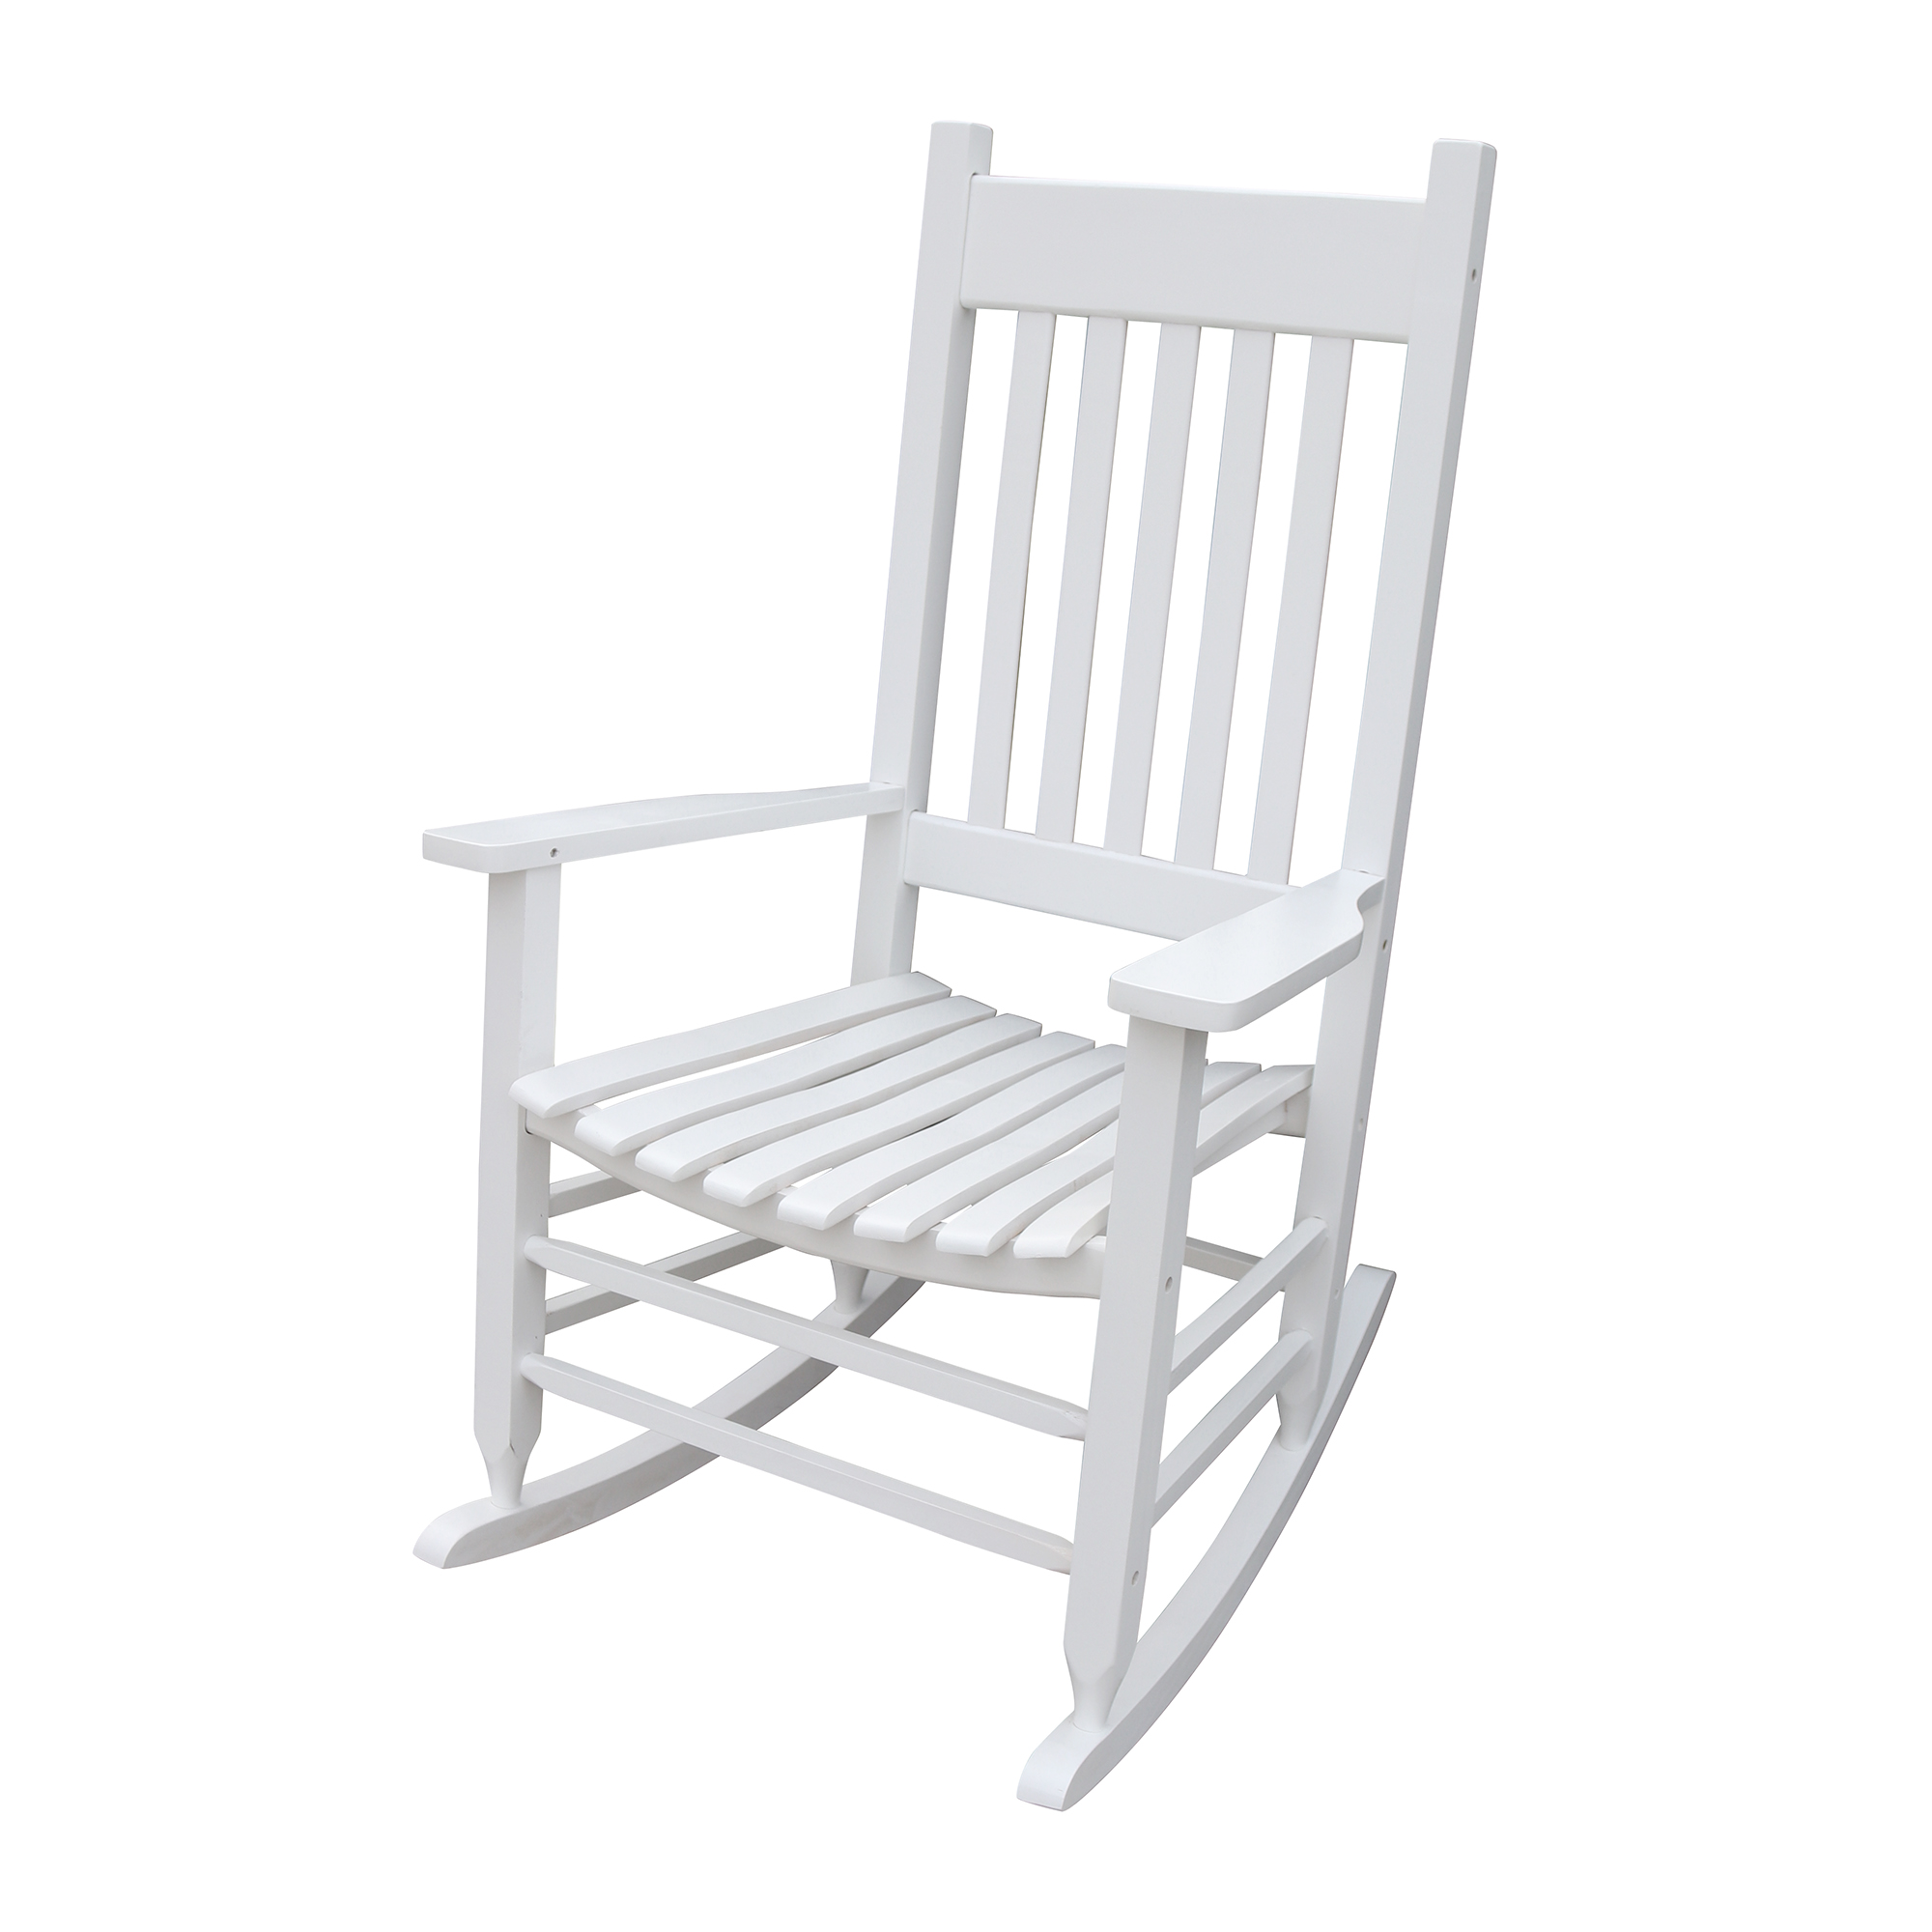 Rocking Chair for Outdoor, Wooden Patio Porch Rocker Chair with Back Support, Ergonomic Wooden Rocking Chair for Patio Porch Backyard, Rocking Bistro Chair Patio Chairs, Max 280lbs, White, A1602 - image 5 of 7